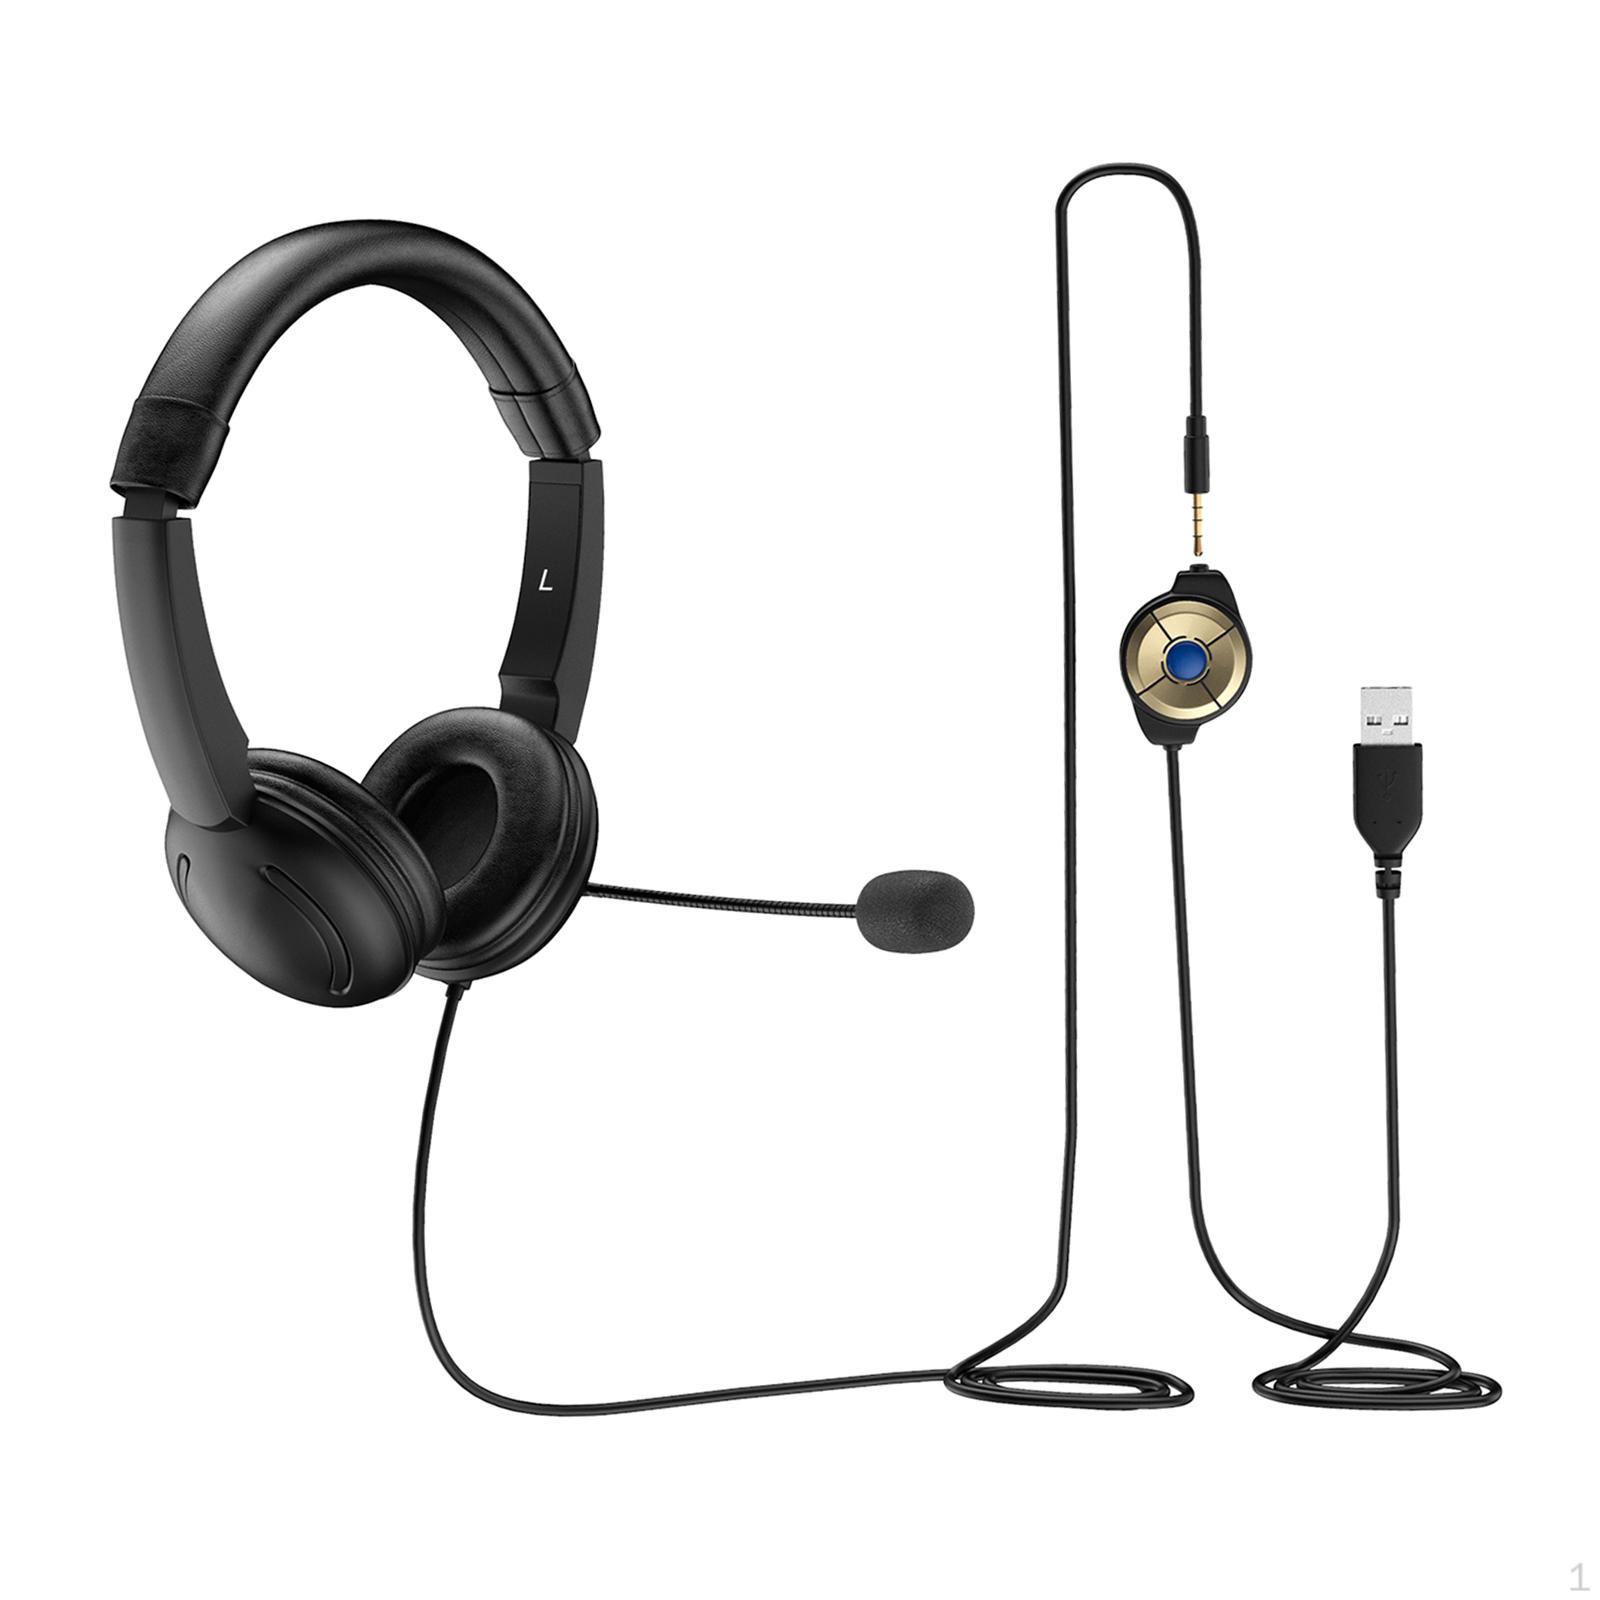 USB Headset Computer Plug and Play,Comfort,Wired Call Center Laptop